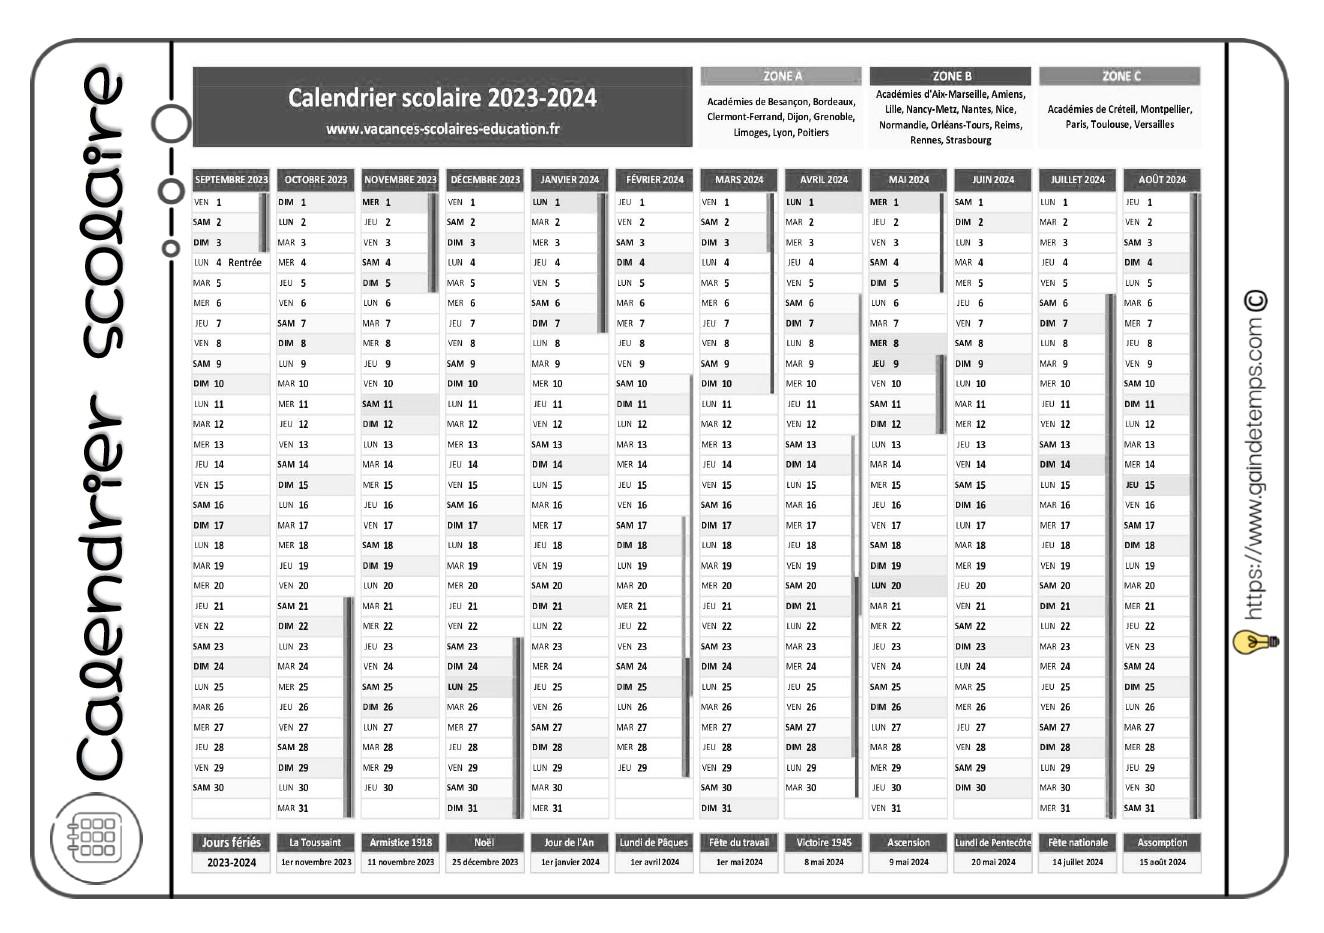 Calendrier scolaire 23 24 nb